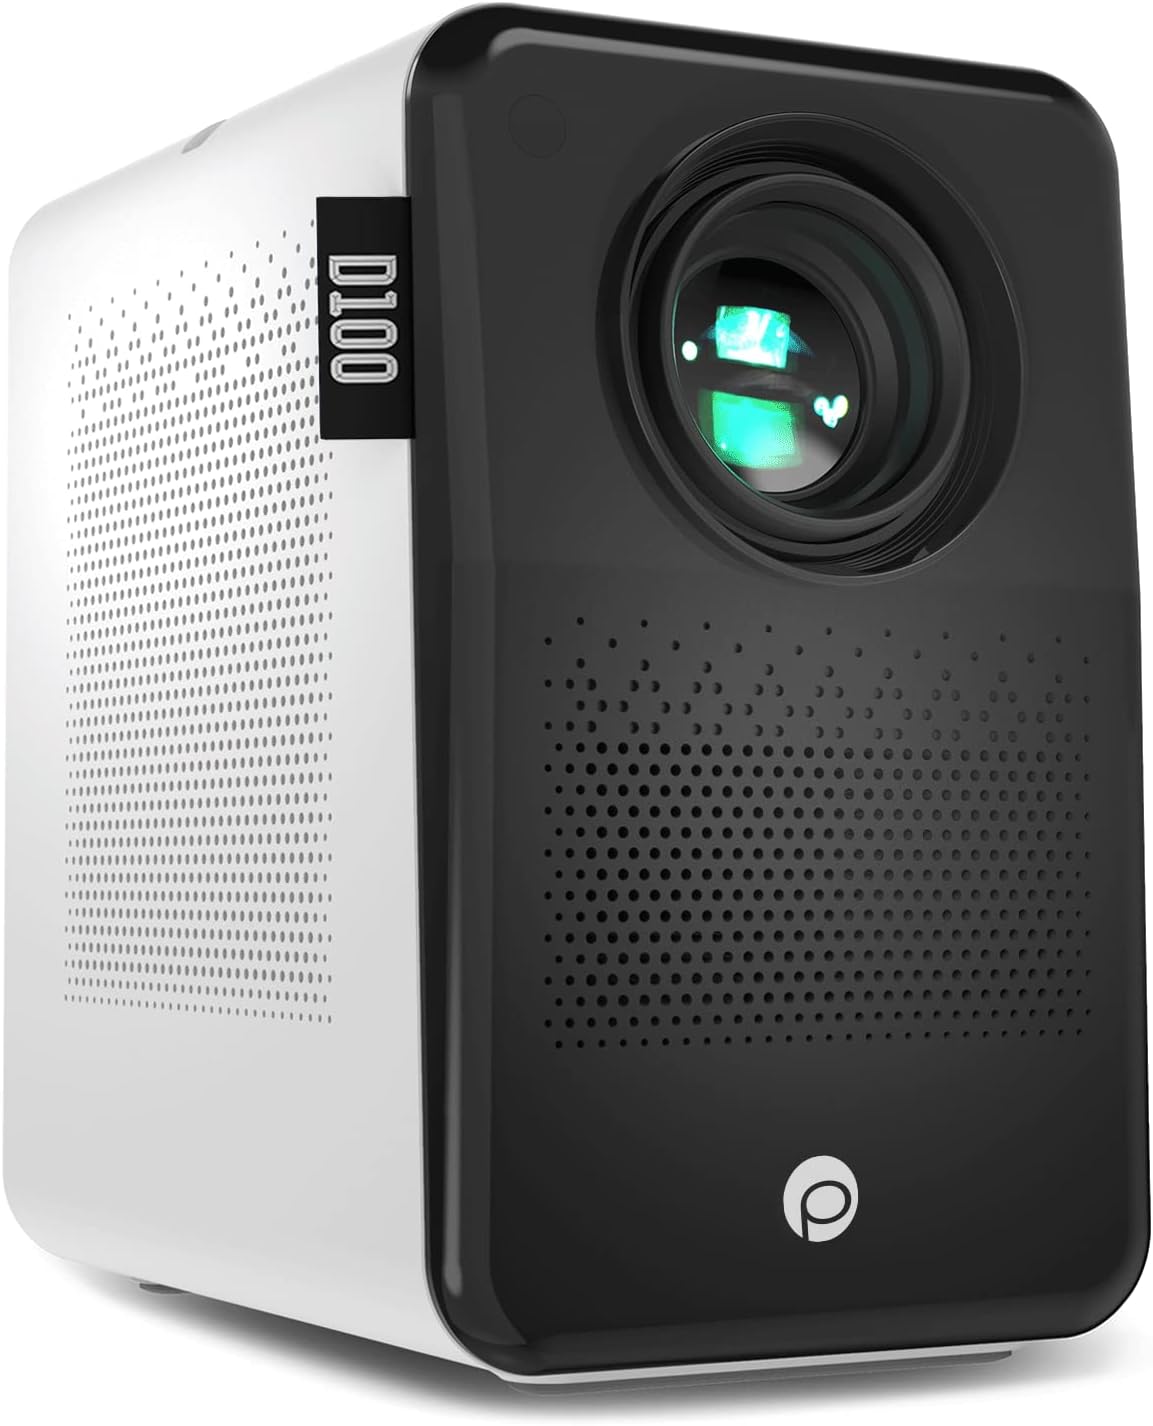 Review of Pixthink WiFi Bluetooth Projector D100